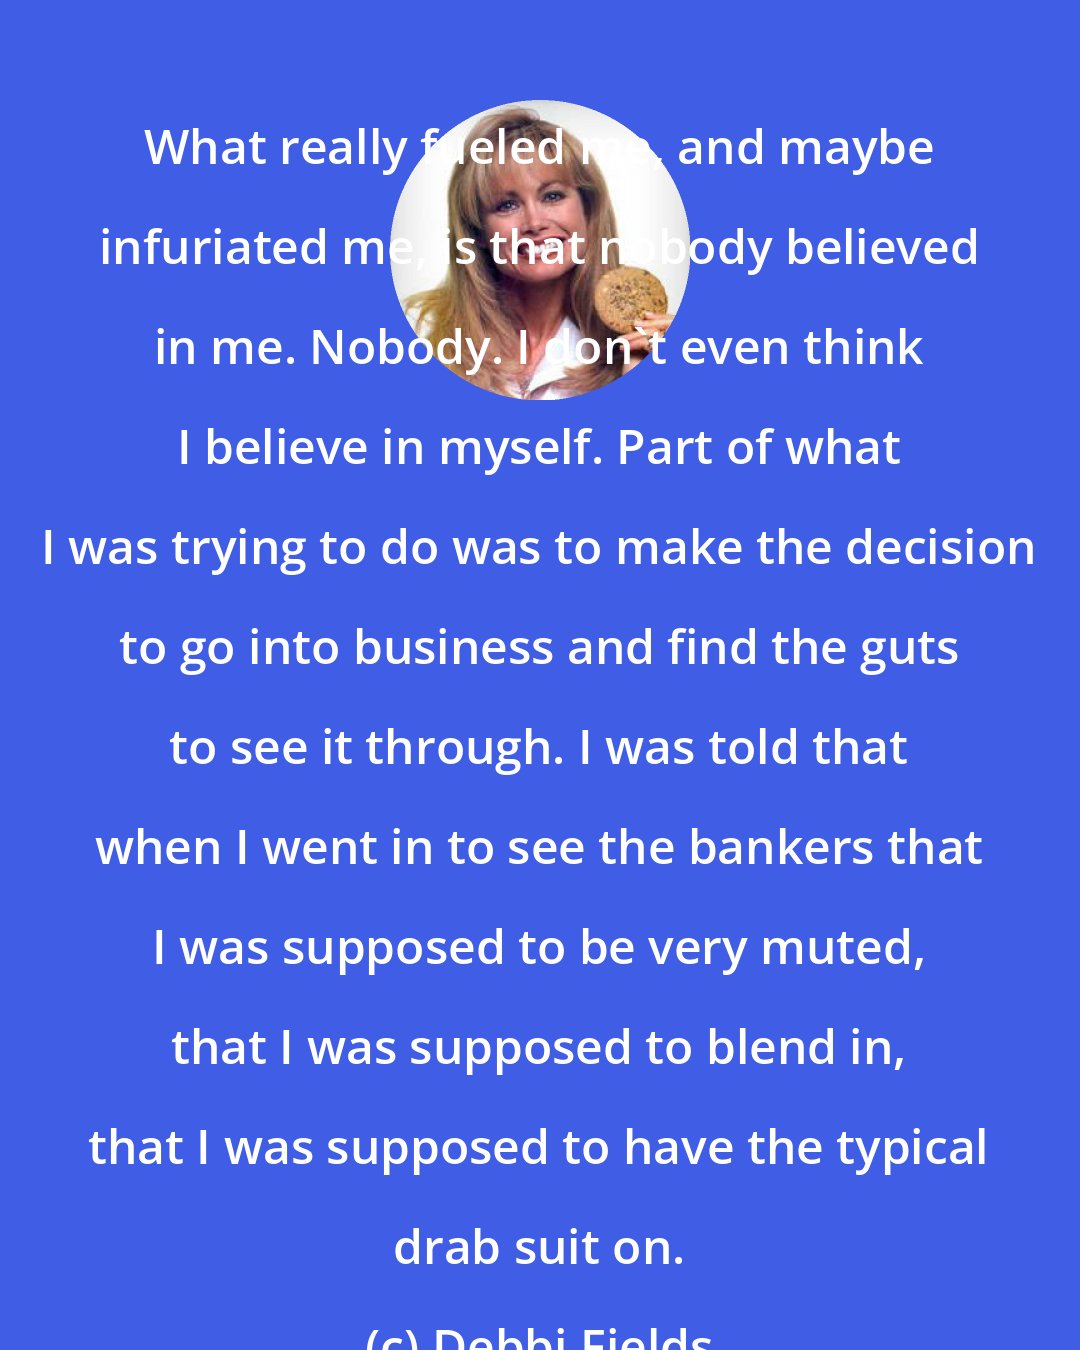 Debbi Fields: What really fueled me, and maybe infuriated me, is that nobody believed in me. Nobody. I don't even think I believe in myself. Part of what I was trying to do was to make the decision to go into business and find the guts to see it through. I was told that when I went in to see the bankers that I was supposed to be very muted, that I was supposed to blend in, that I was supposed to have the typical drab suit on.